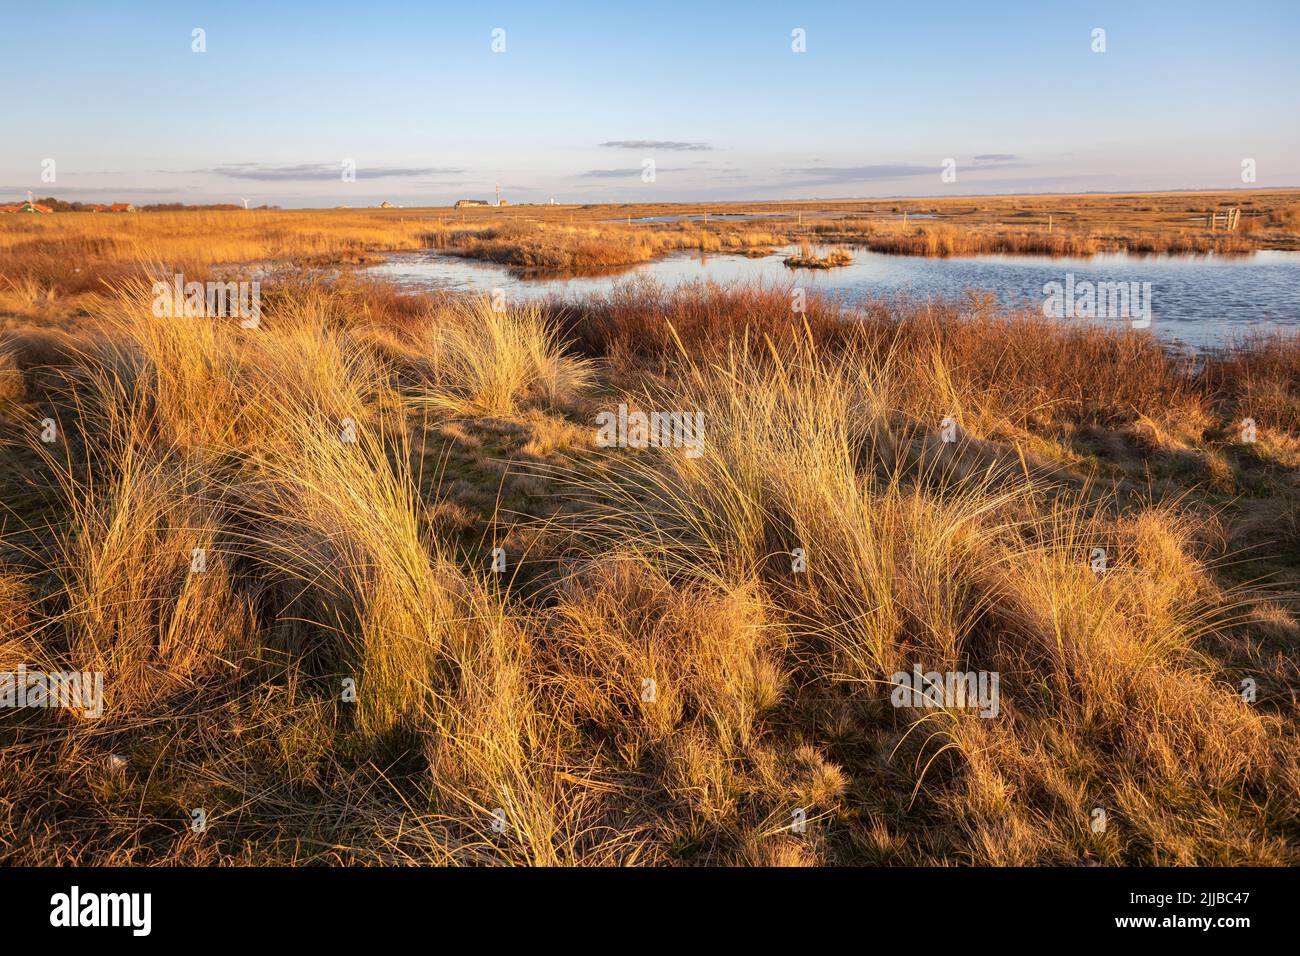 Typical landscape on the East Frisian Island of Spiekeroog, Germany Stock Photo